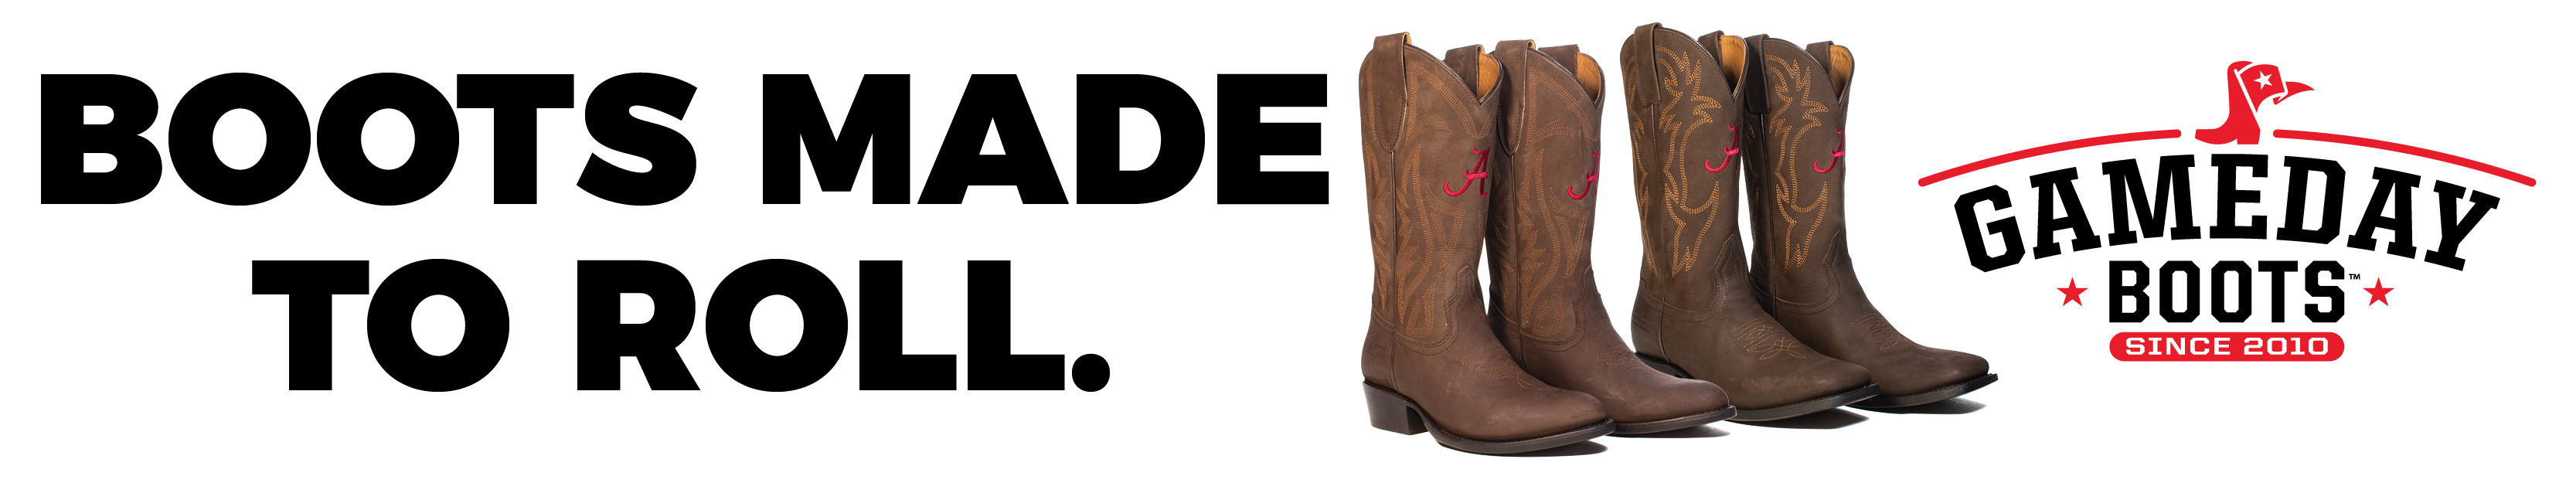 Men's & Women's Gameday Boots.  Shop now for drop shipping directly from the vendor.